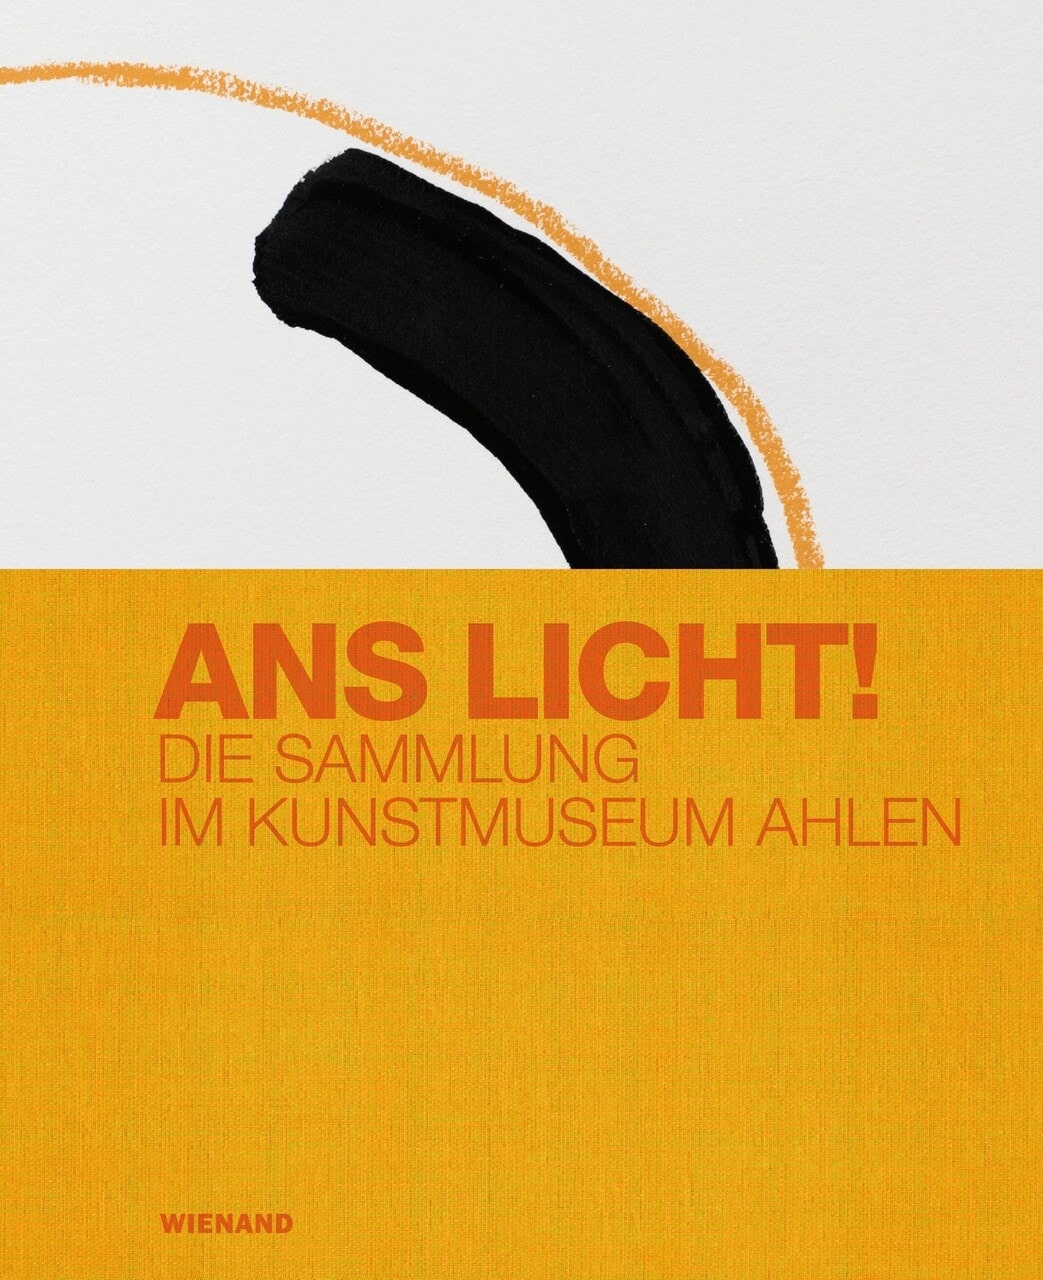 Ans Licht! The Collection of Kunstmuseum Ahlen. Book 2023.